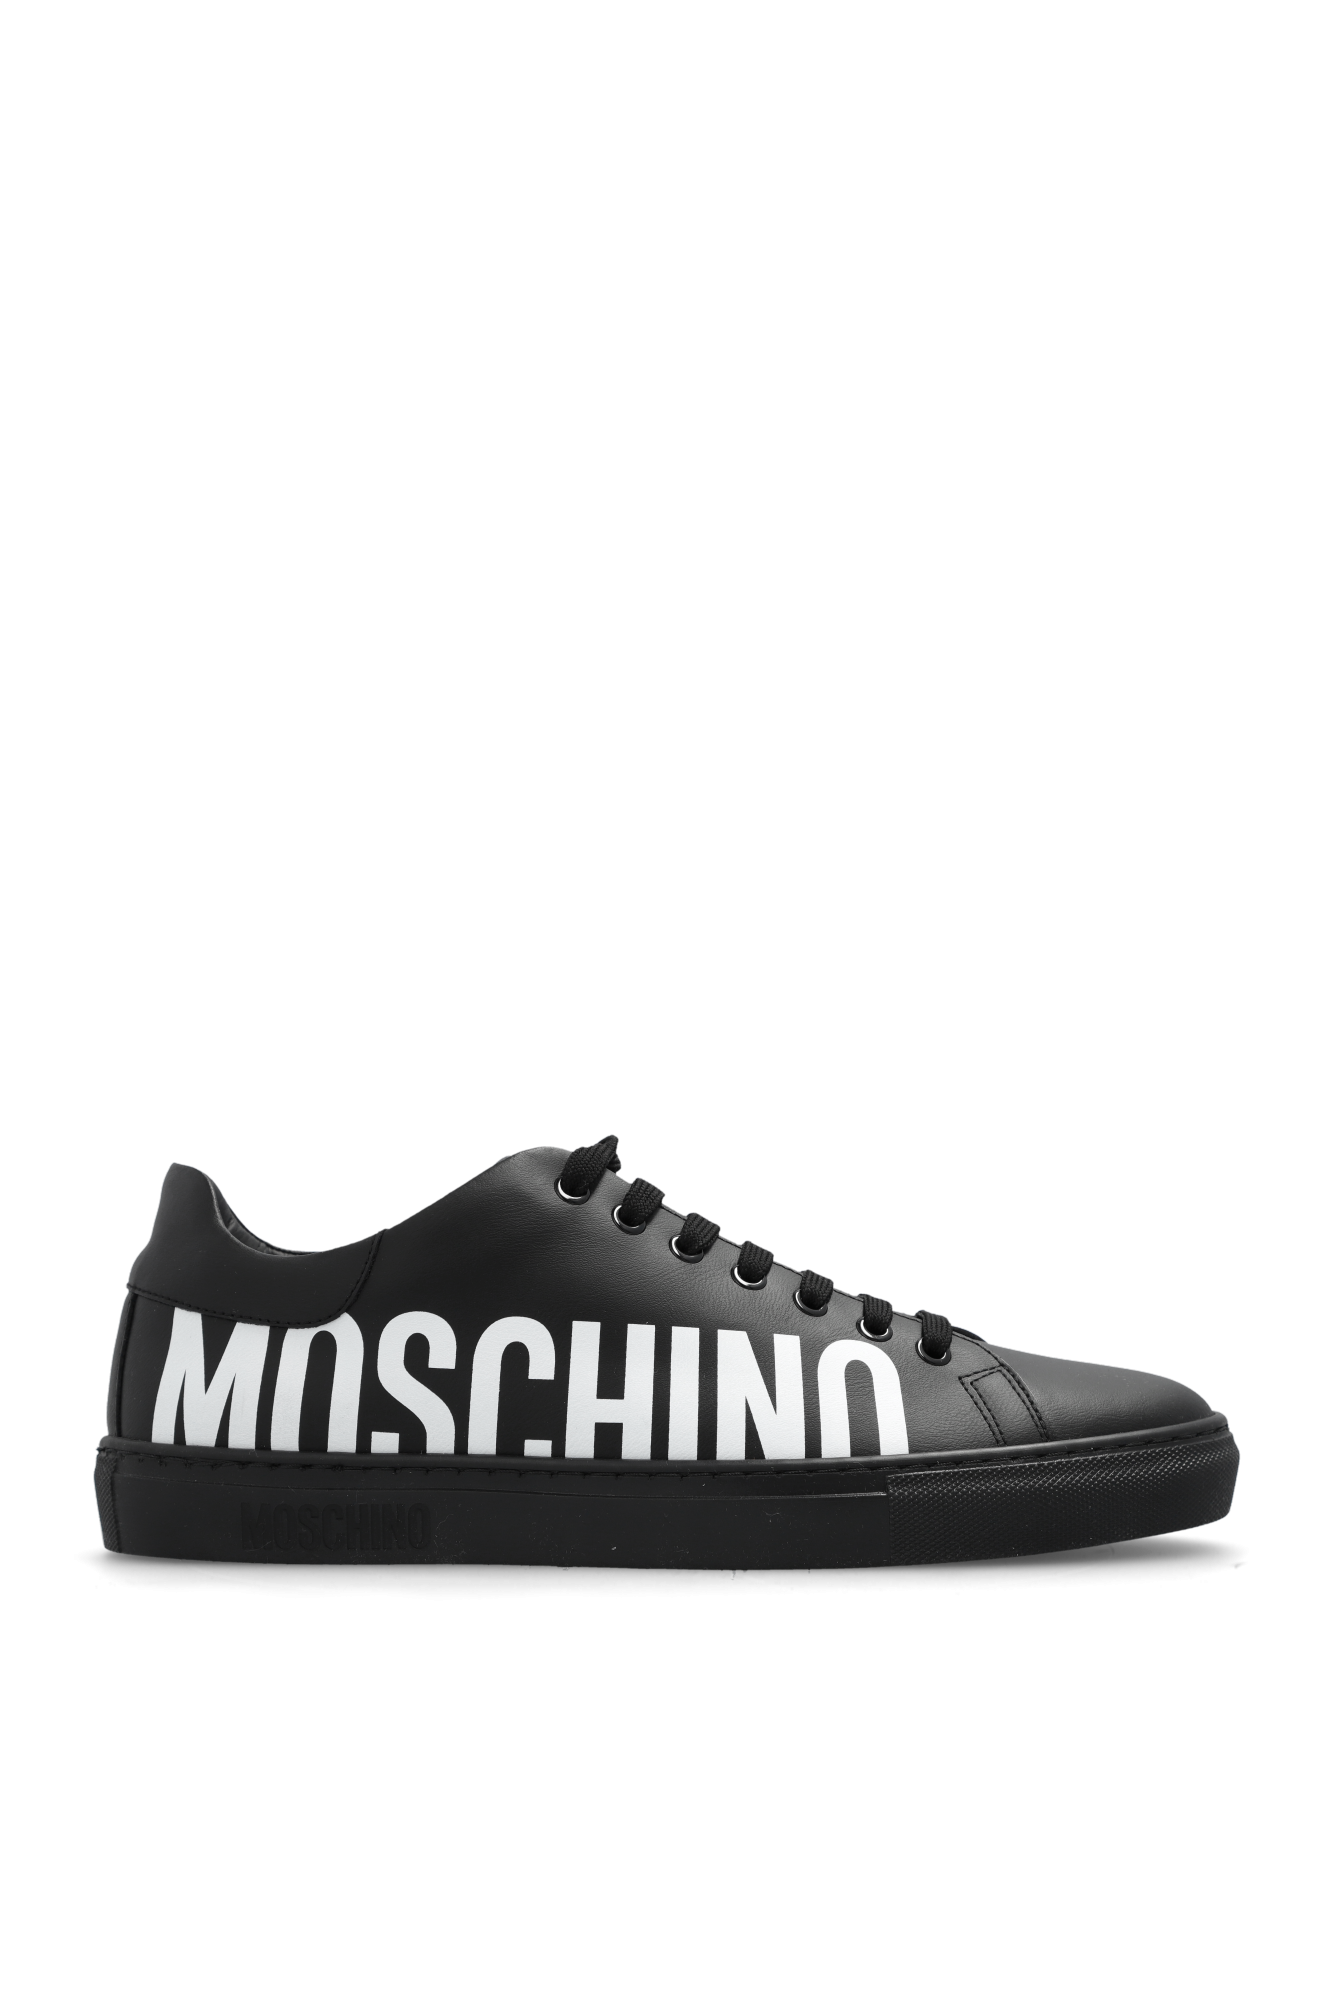 Black Lace-up sneakers Moschino - Vitkac France